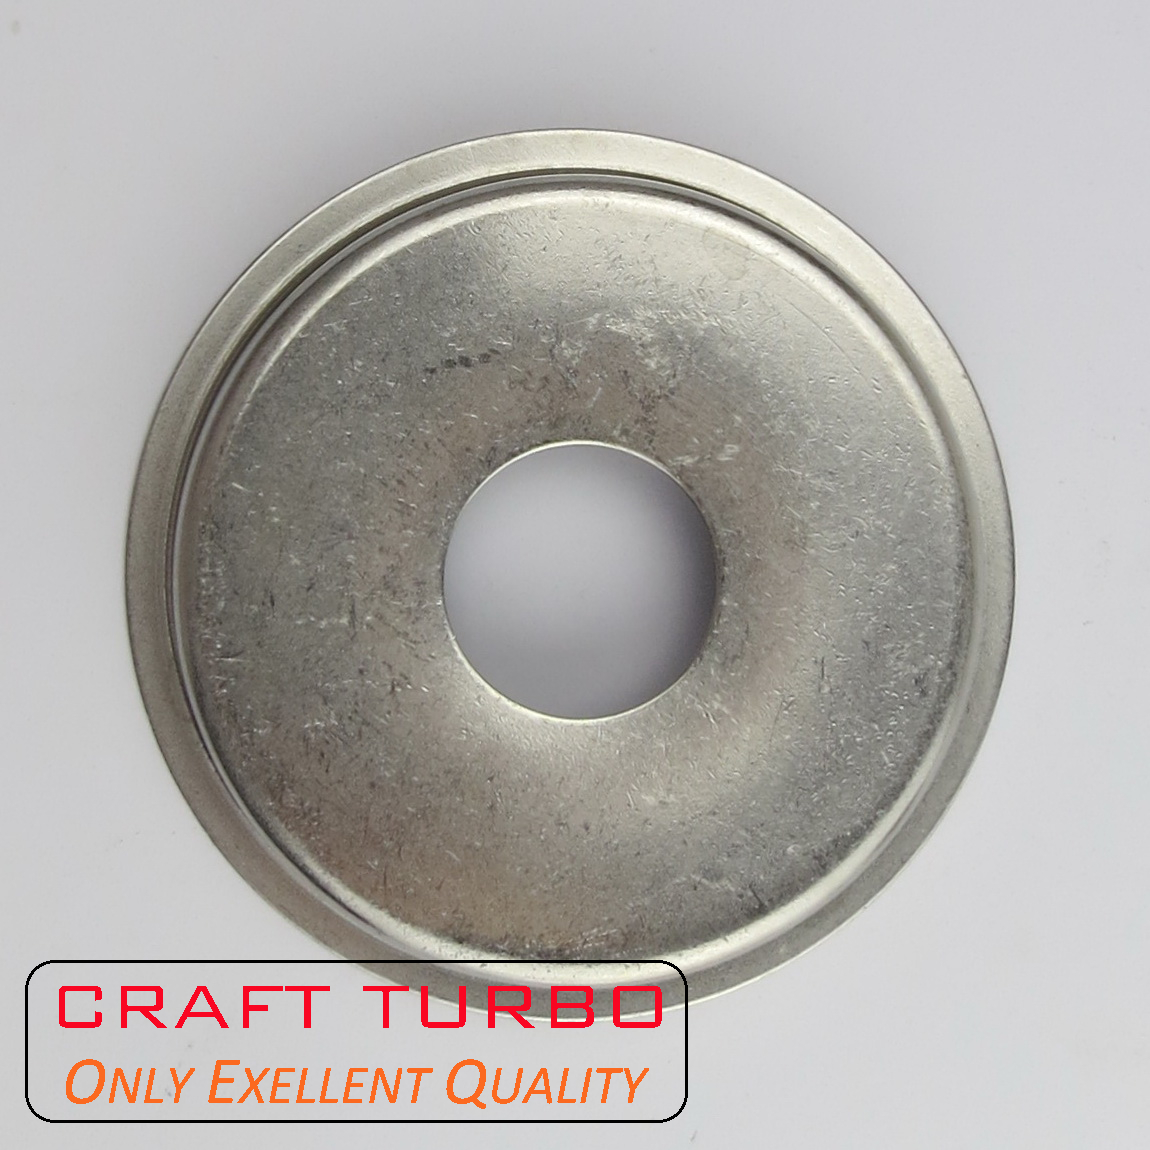 TD07 Heat Shield for Turbocharger 